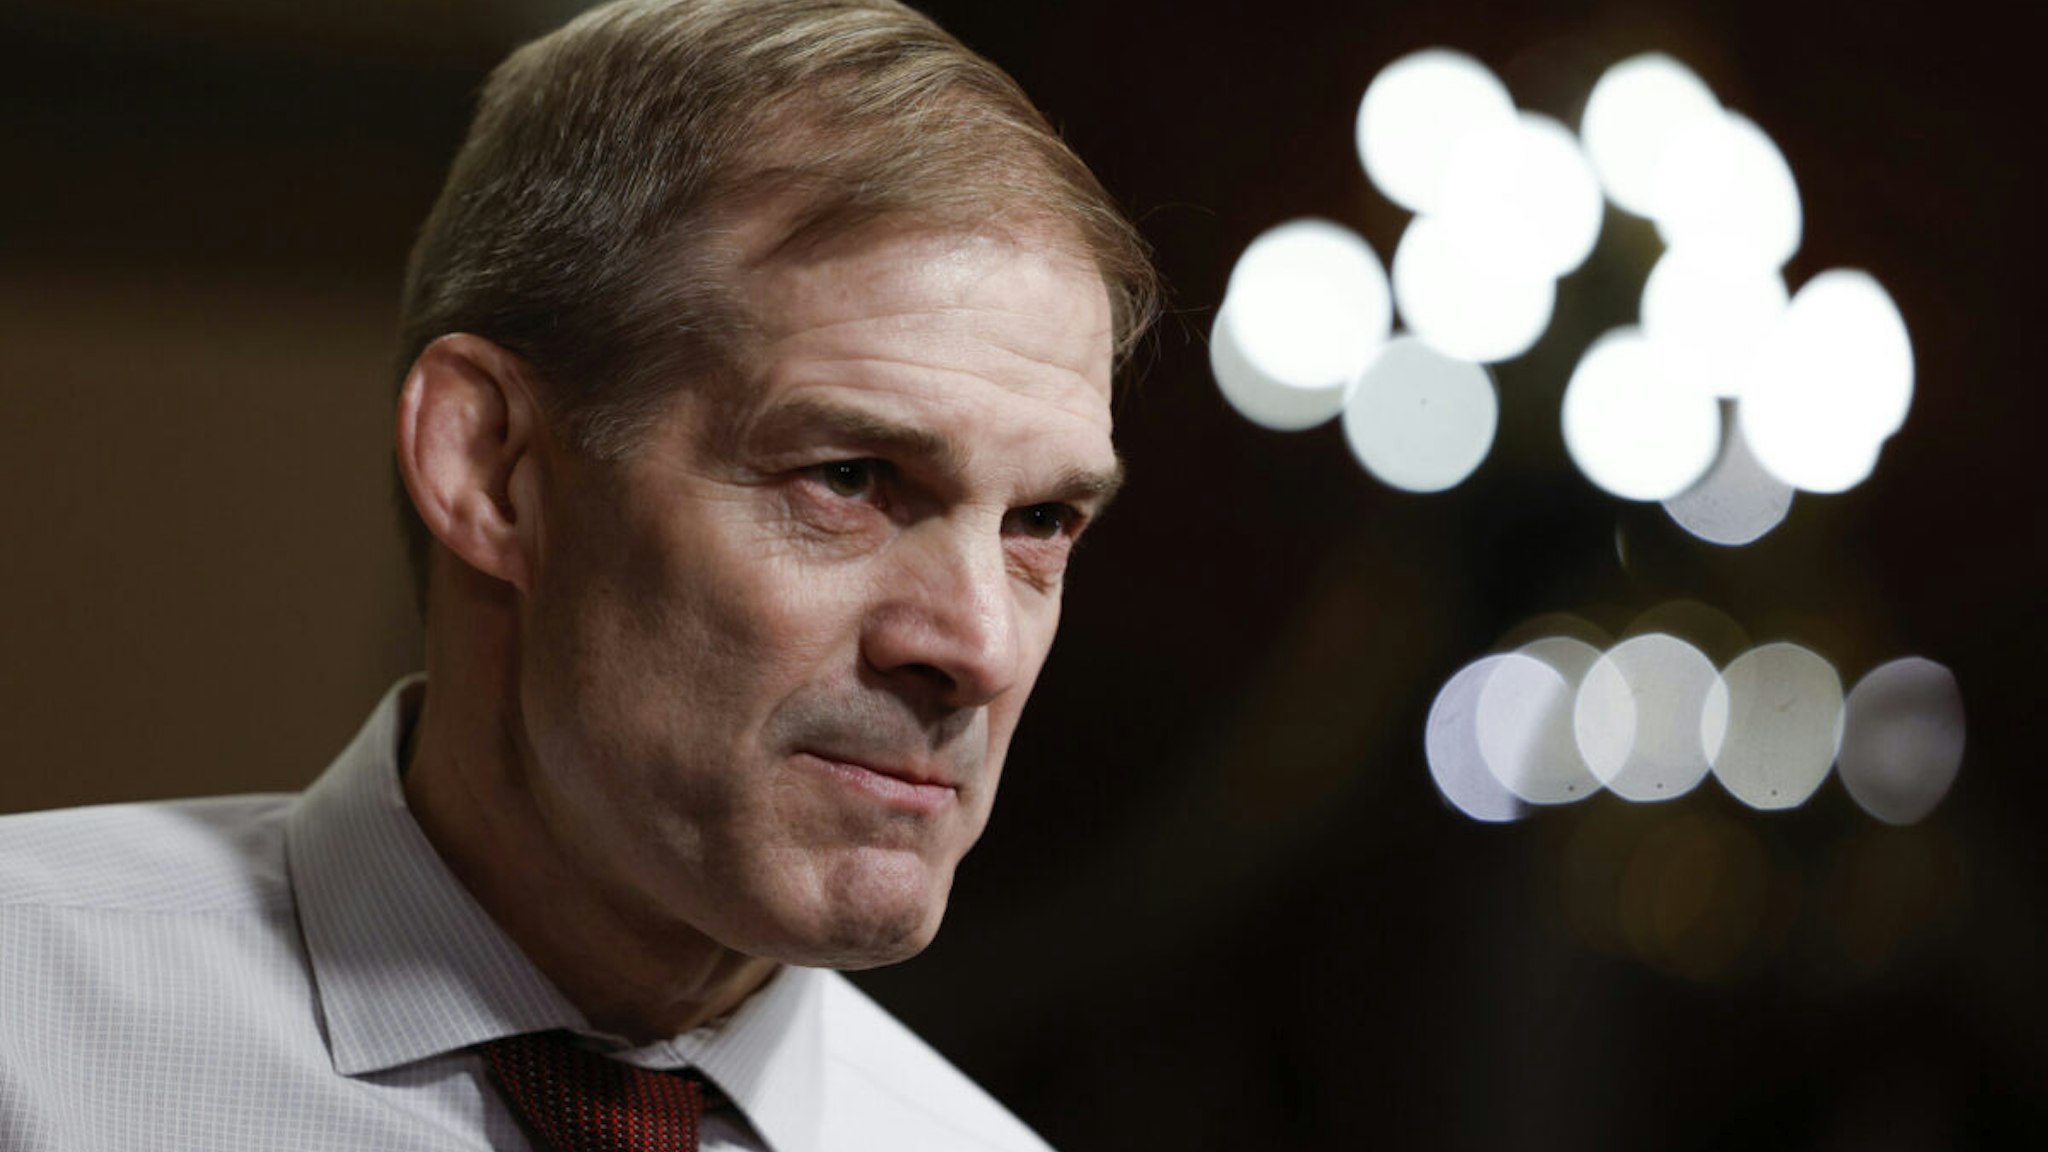 Rep. Jim Jordan (R-OH) speaks during an on-camera interview near the House Chambers during a series of votes in the U.S. Capitol Building on January 09, 2023 in Washington, DC. During 118th Congress's first day of business since electing a Speaker of the House, the House held a series of votes on a rules package with parameters for the House of Representatives.